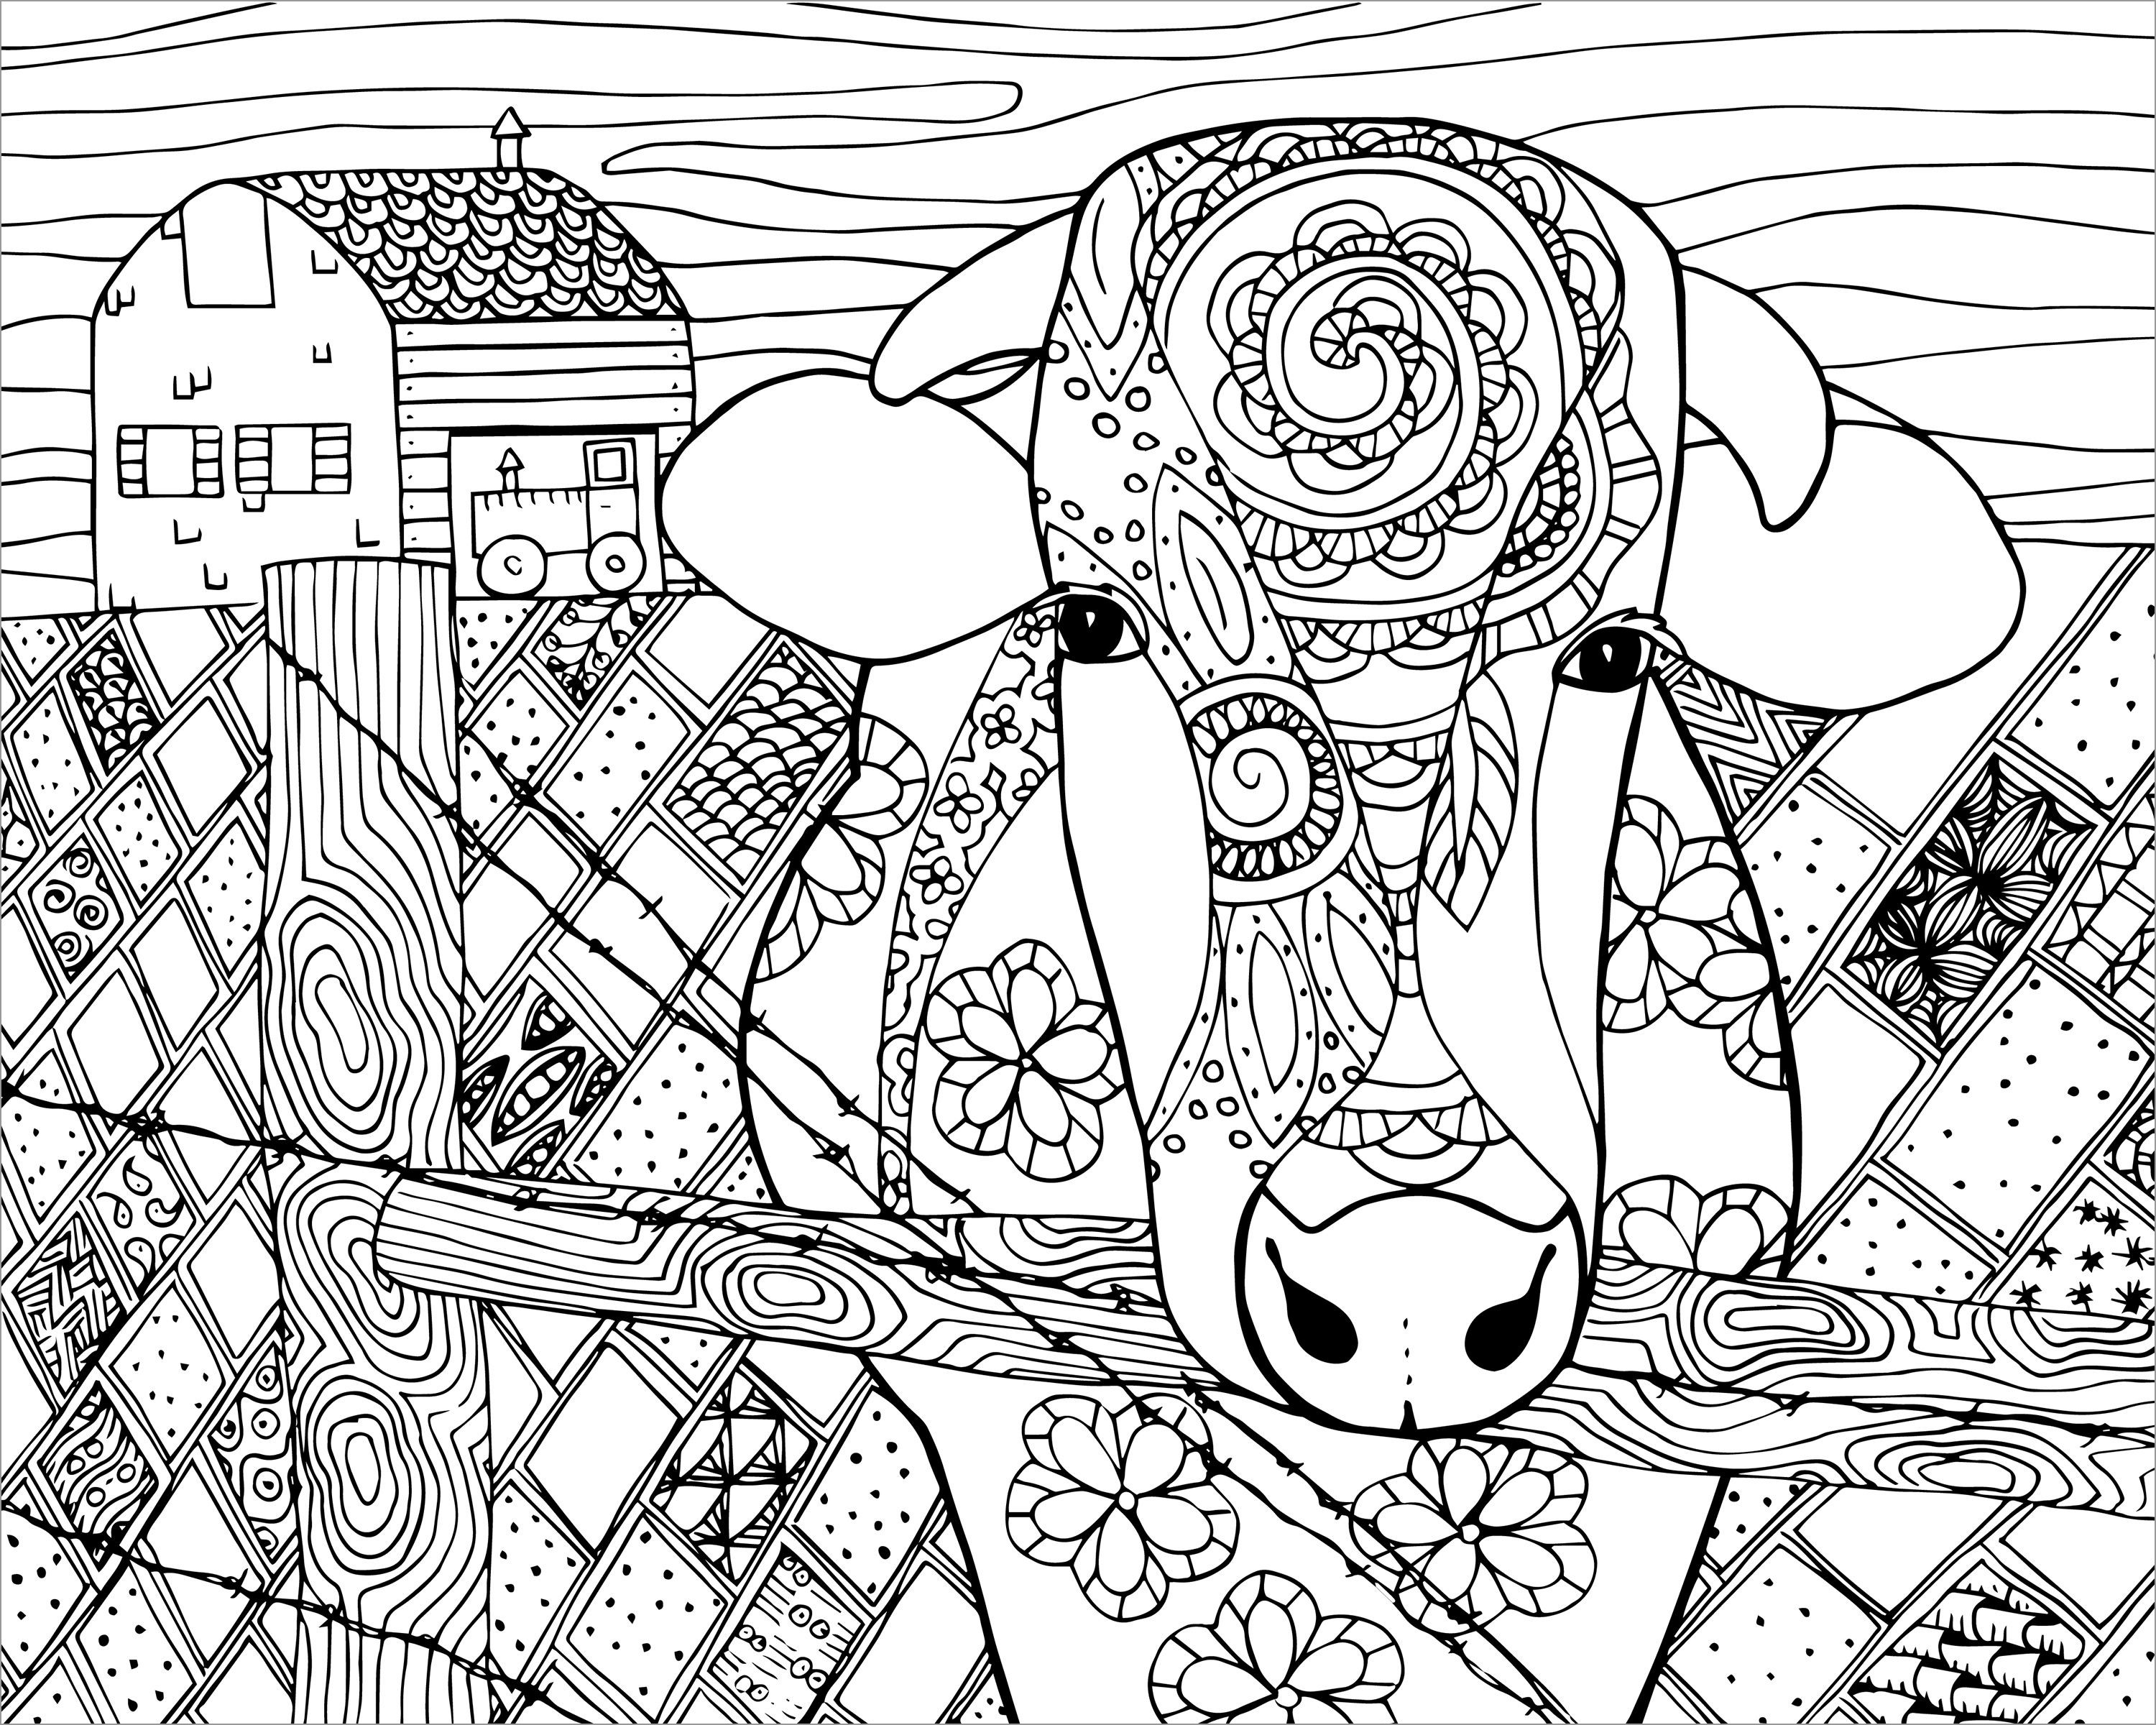 Abstract Cow Coloring Page for Adults